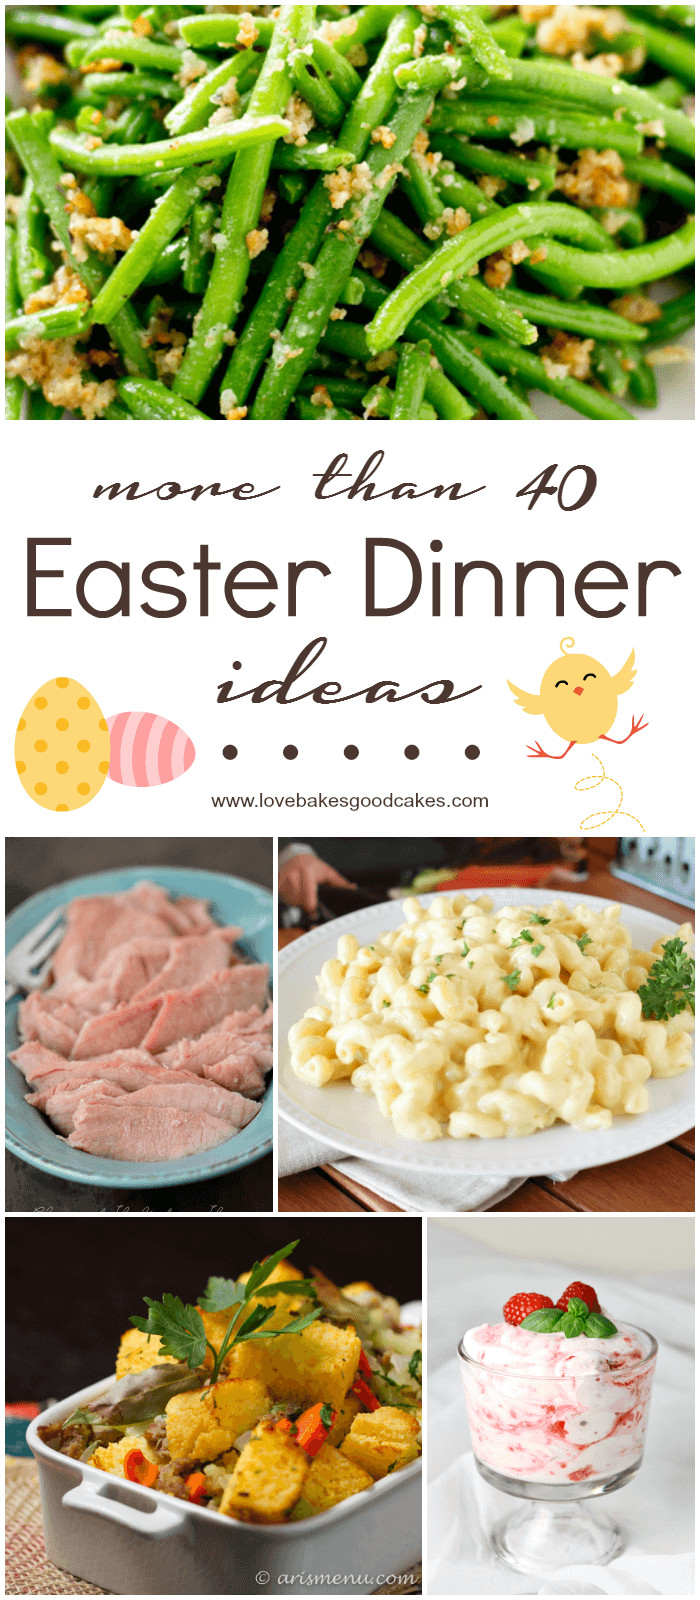 Easter Dinner Menu Ideas And Recipes
 More than 40 Easter Dinner Ideas